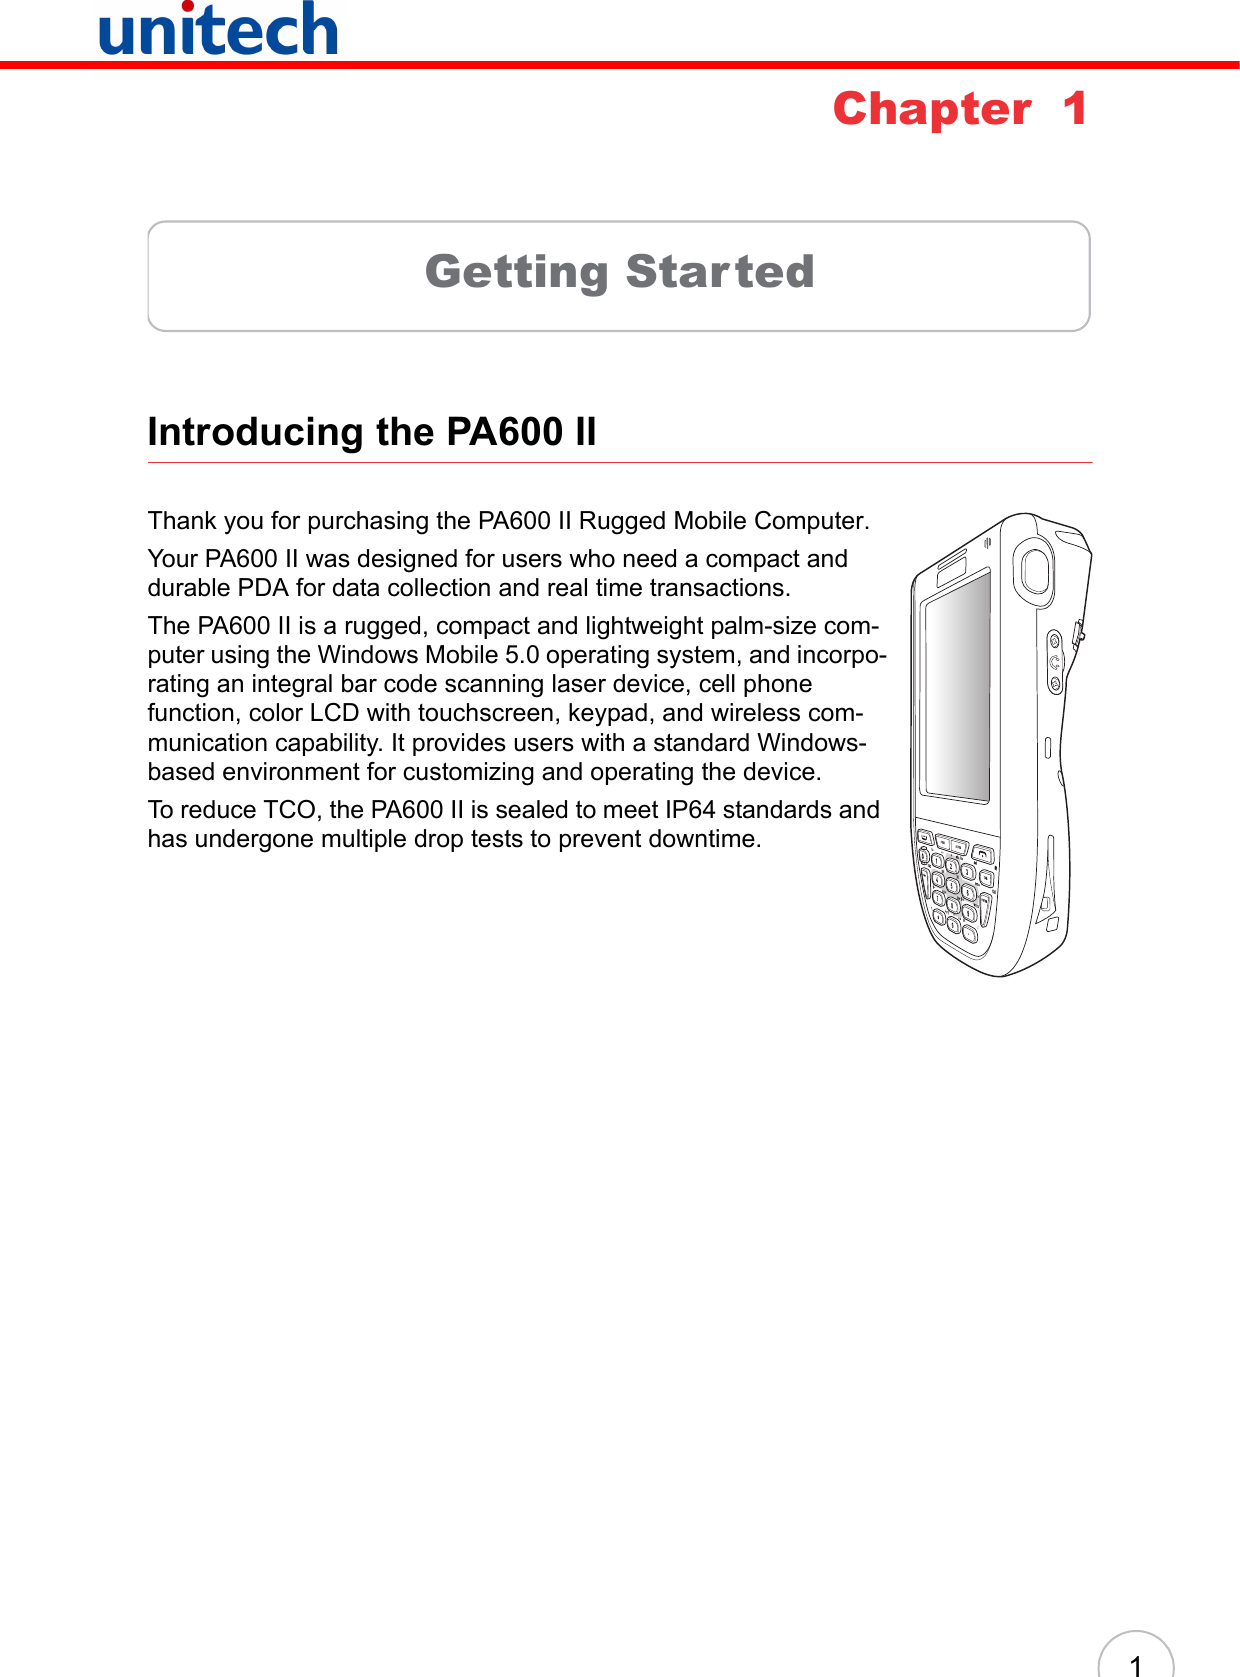 1Chapter  1Getting StartedIntroducing the PA600 IIThank you for purchasing the PA600 II Rugged Mobile Computer.Your PA600 II was designed for users who need a compact and durable PDA for data collection and real time transactions.The PA600 II is a rugged, compact and lightweight palm-size com-puter using the Windows Mobile 5.0 operating system, and incorpo-rating an integral bar code scanning laser device, cell phone function, color LCD with touchscreen, keypad, and wireless com-munication capability. It provides users with a standard Windows-based environment for customizing and operating the device.To reduce TCO, the PA600 II is sealed to meet IP64 standards and has undergone multiple drop tests to prevent downtime.